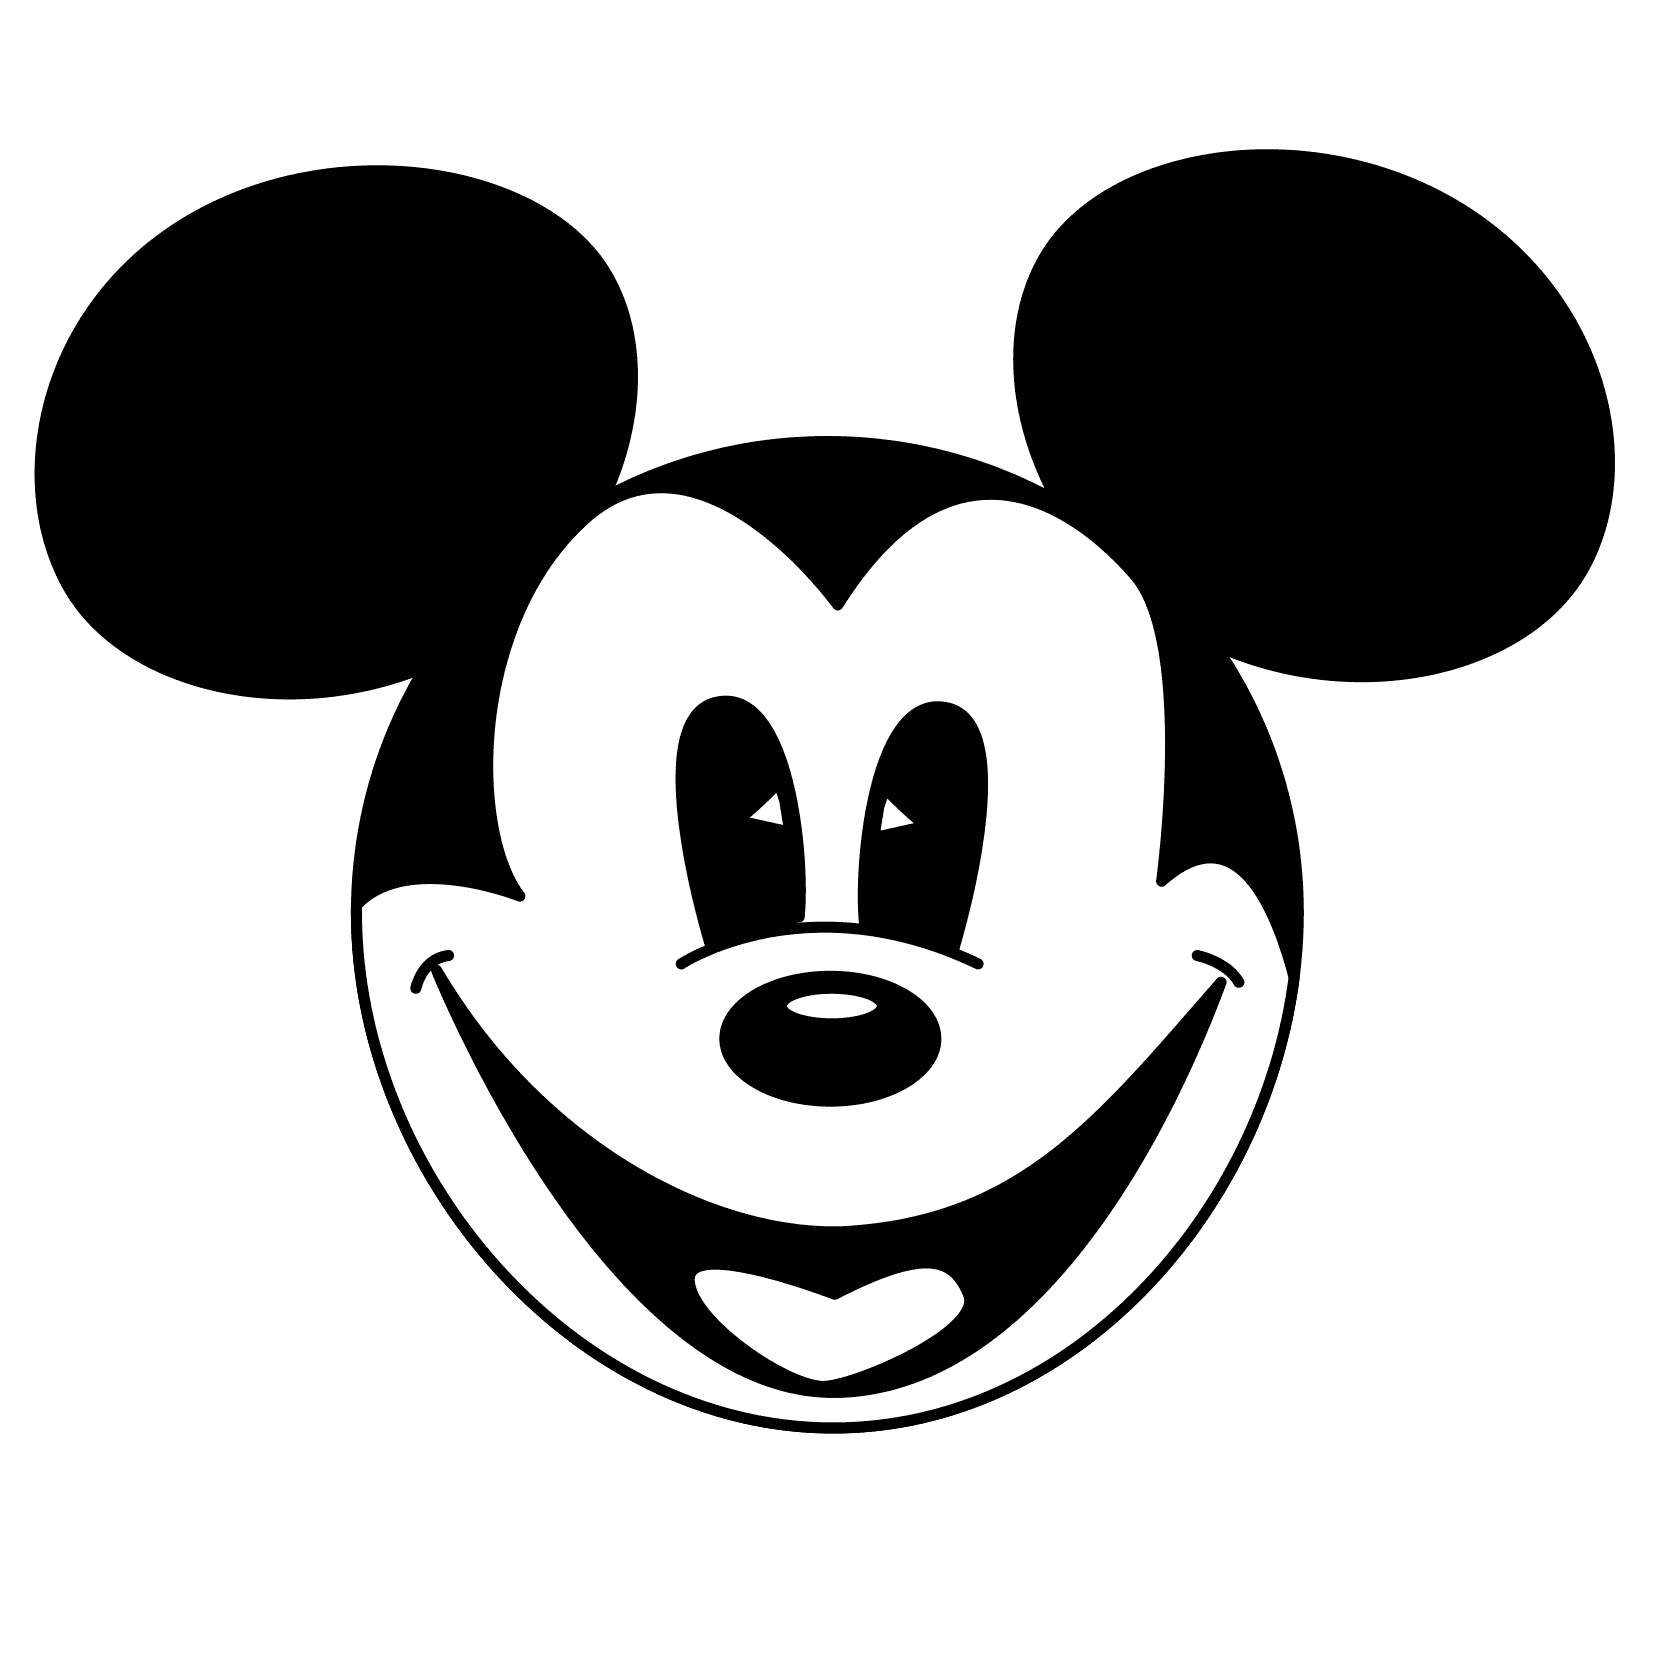 mickey mouse clipart Large Image. Mickey mouse drawings, Mickey mouse silhouette, Mickey mouse clipart